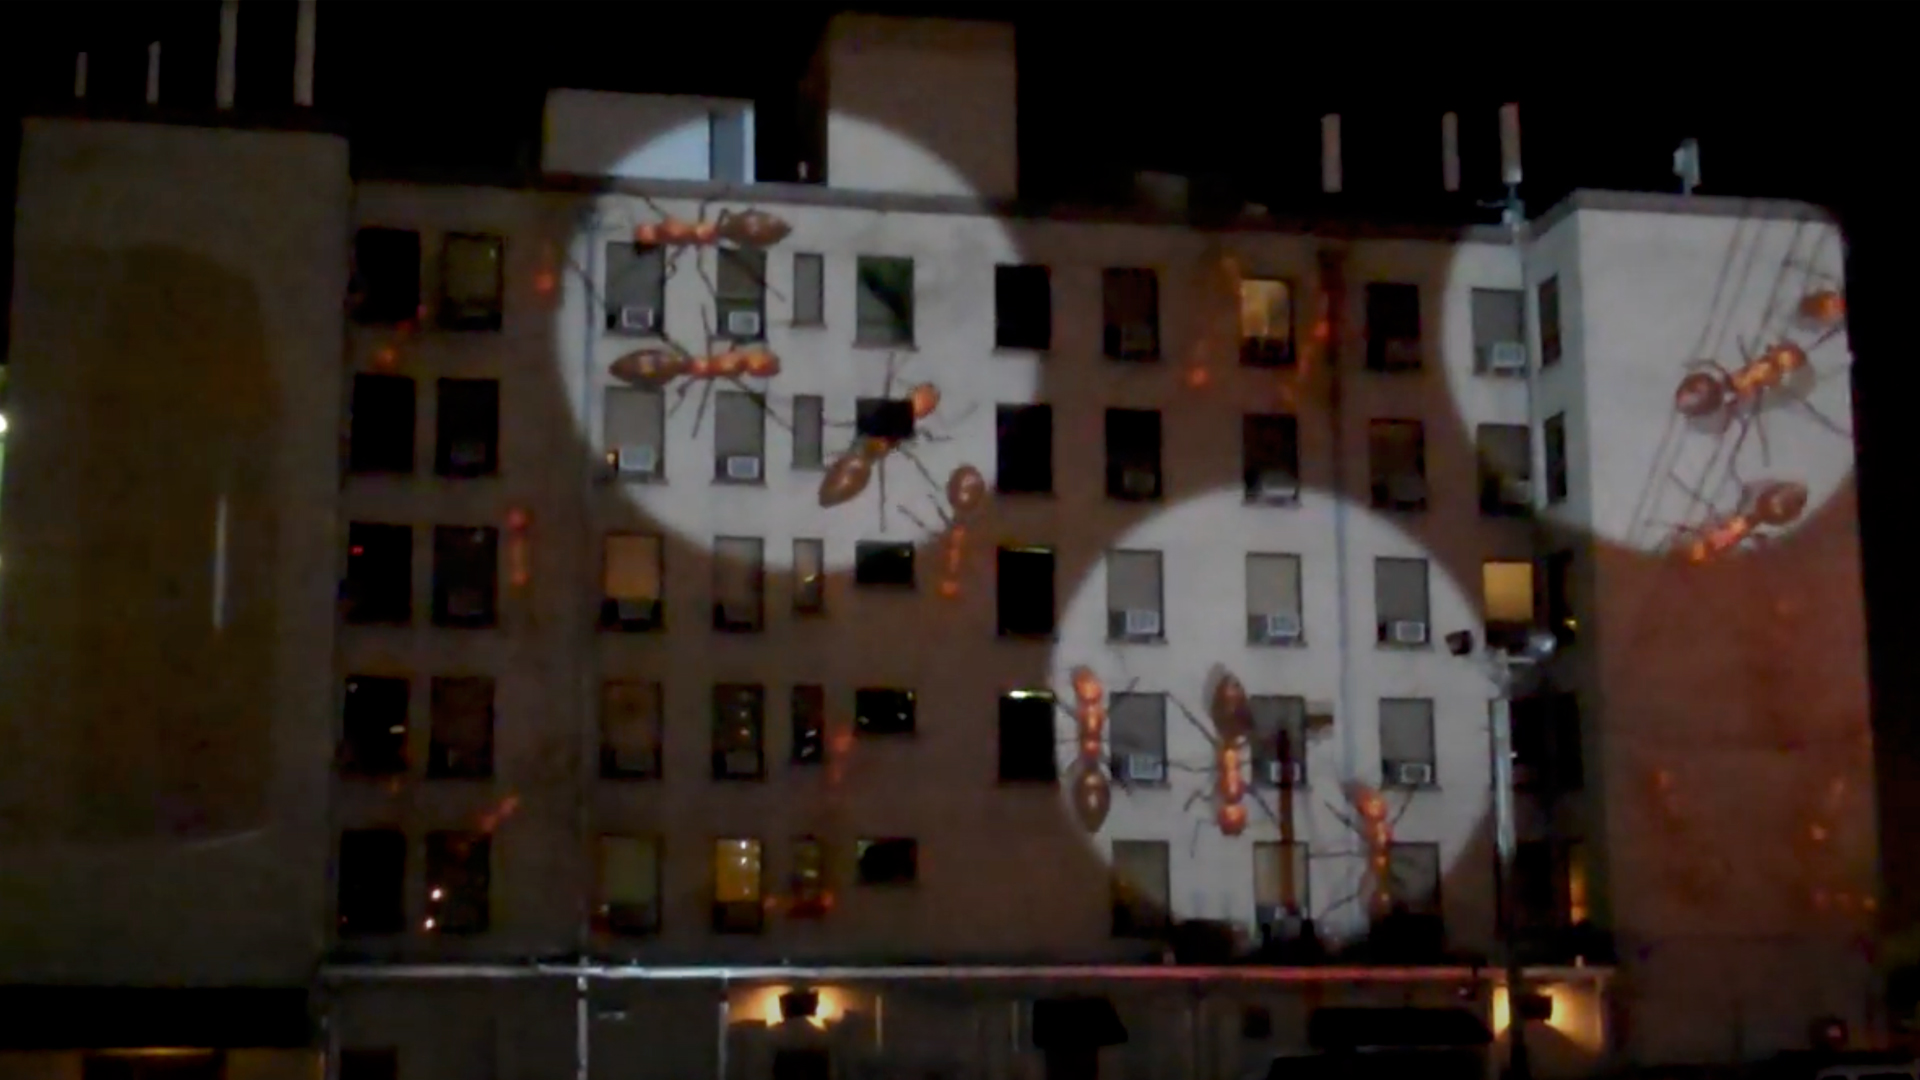 Giant Ants Building Projection